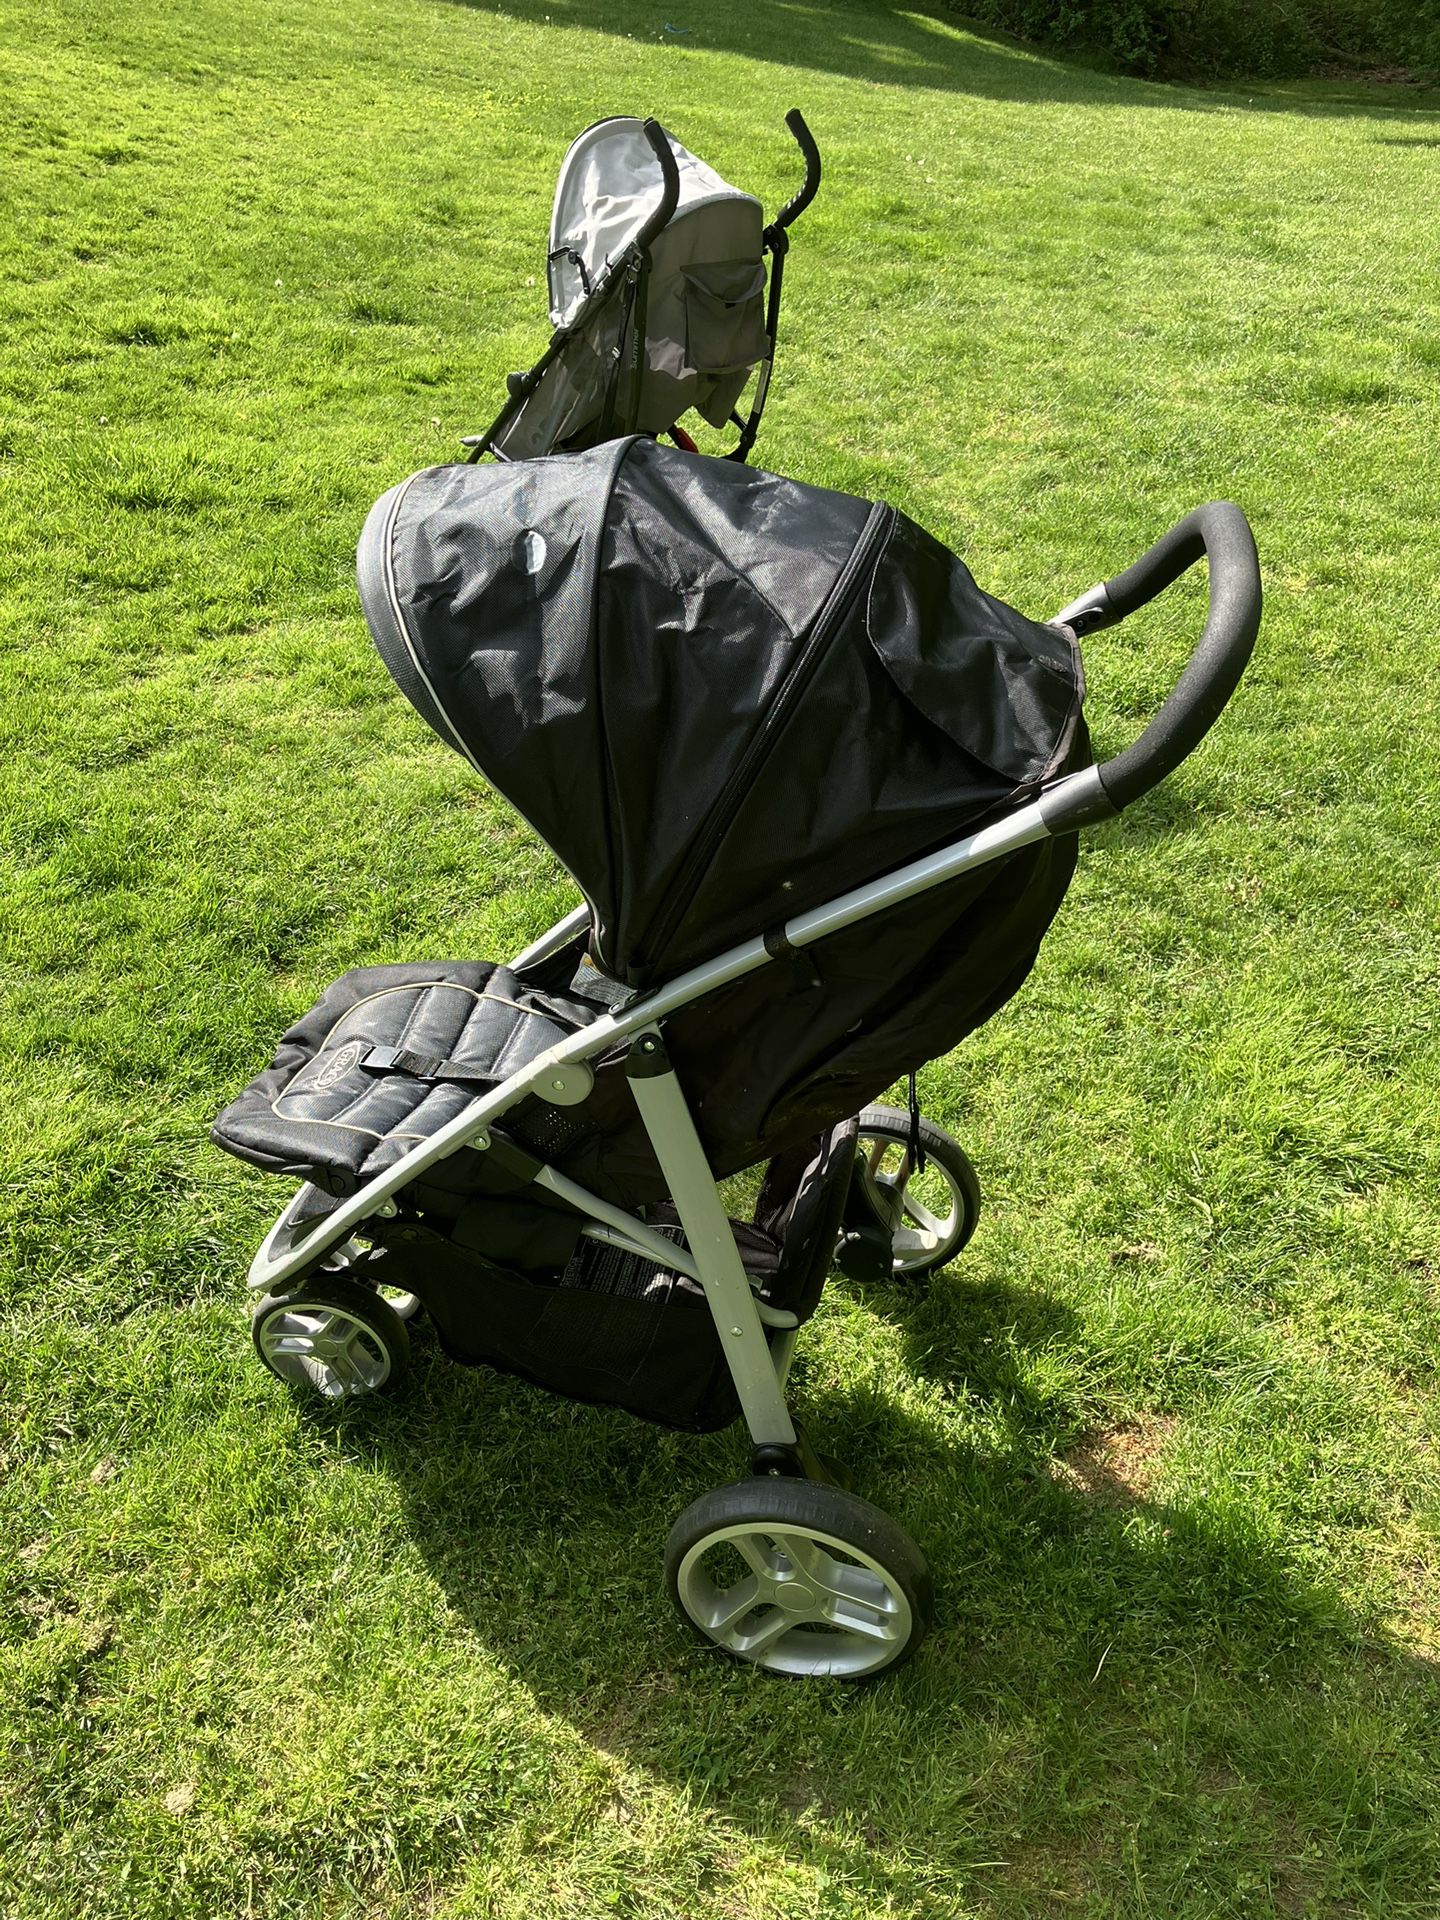 Used Like New Baby Stroller